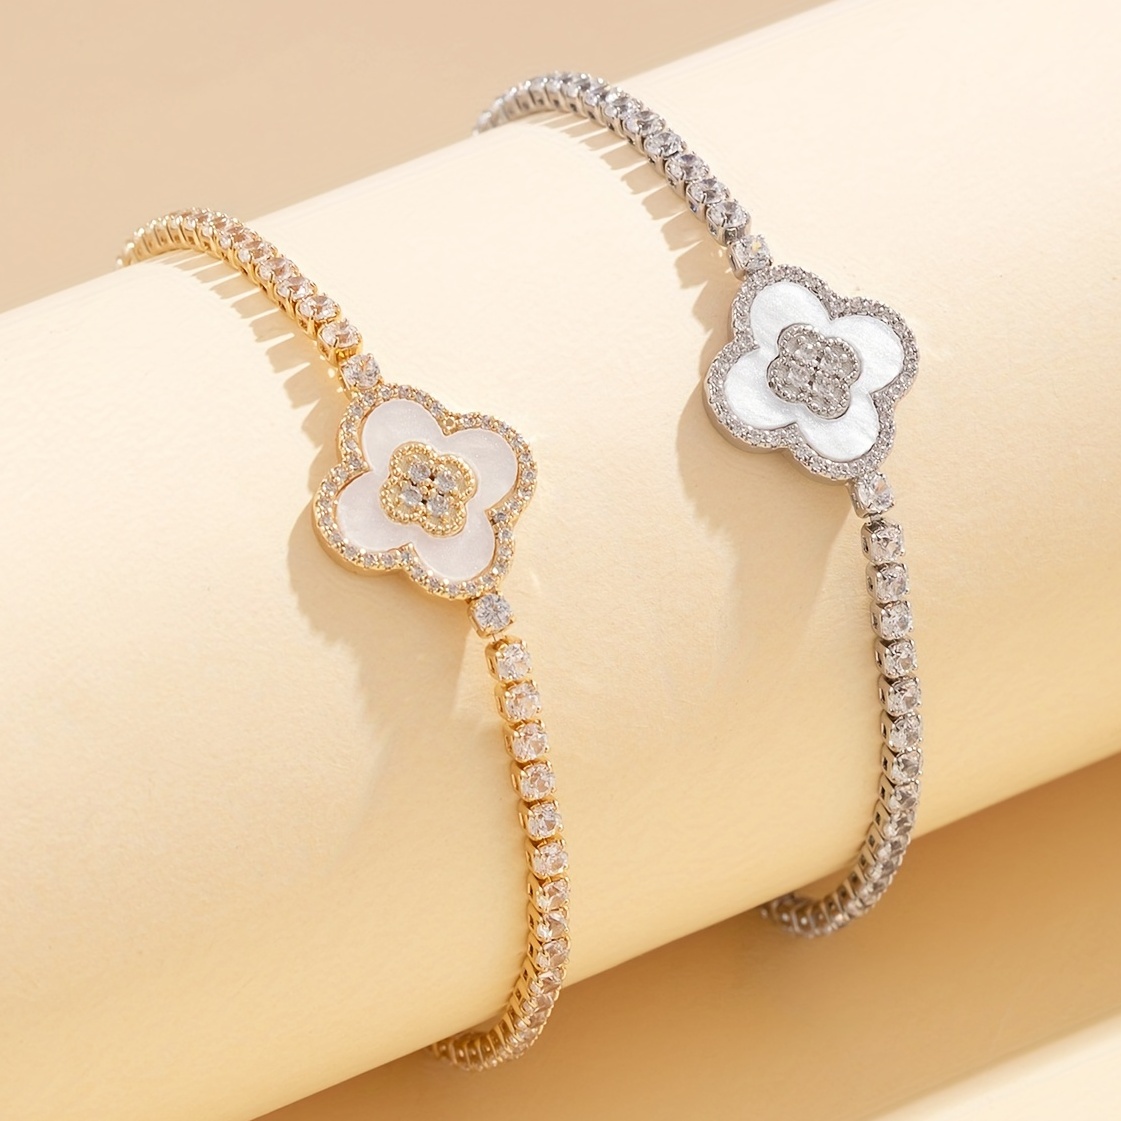 1pc Multicolor Daisy With Rhinestone Double-Sided Four Leaf Clover Bracelet  For Women